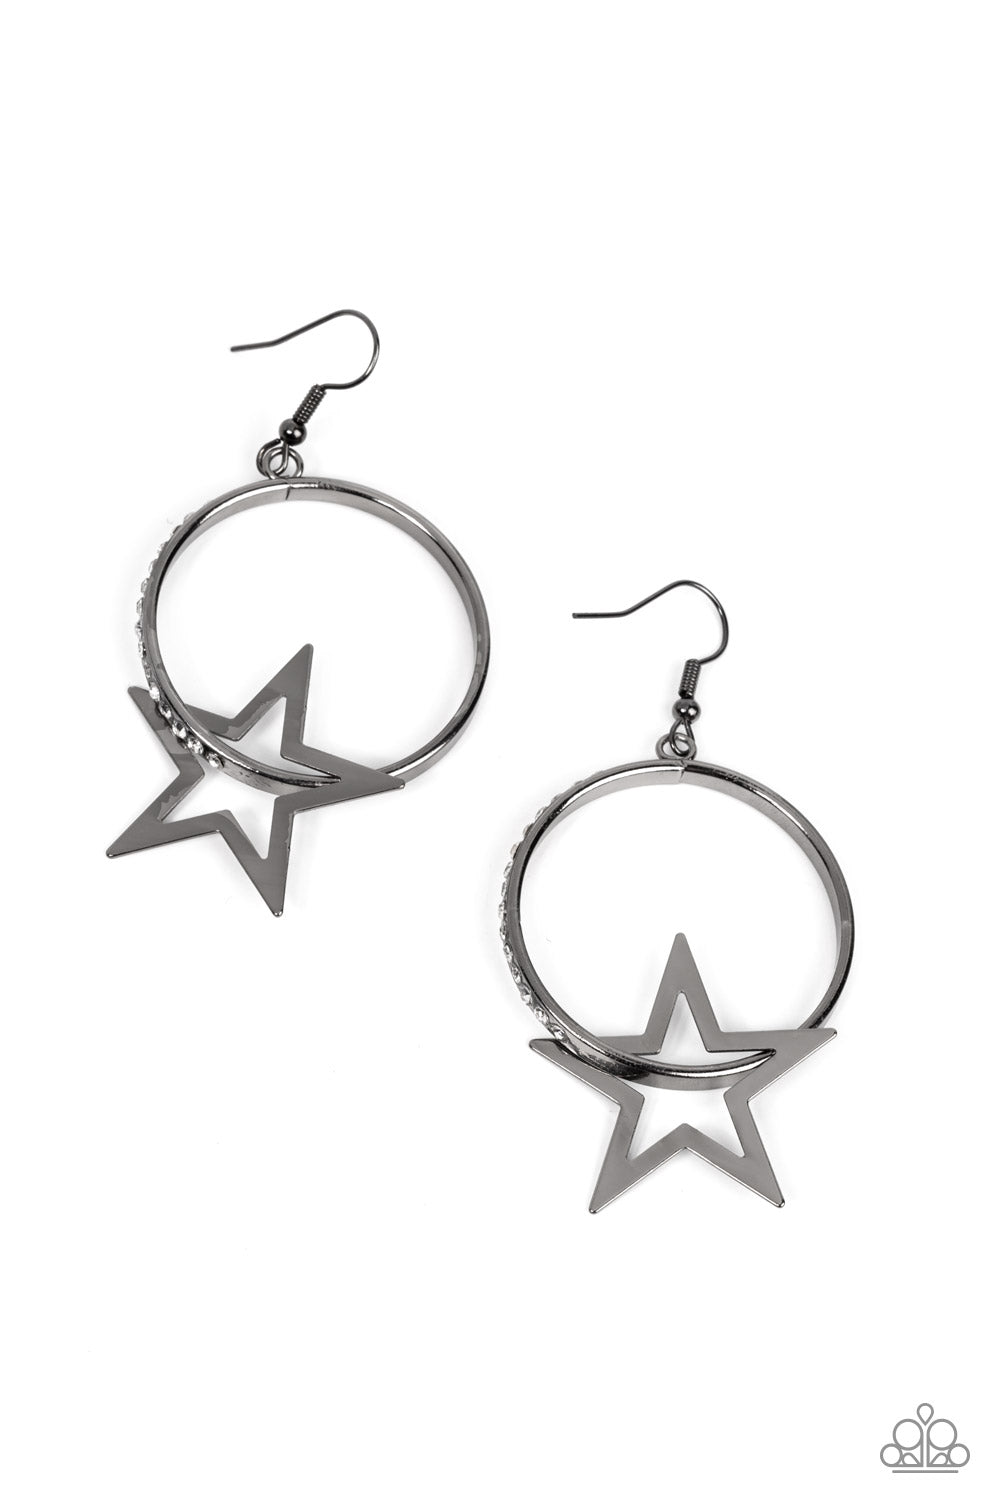 Superstar Showcase Black Earring - Paparazzi Accessories  A flat gunmetal star glides along a gunmetal hoop, resulting in a stellar fashion. The front of the gunmetal hoop is encrusted in glassy white rhinestones for a glitzy finish. Earring attaches to a standard fishhook fitting.  Sold as one pair of earrings.